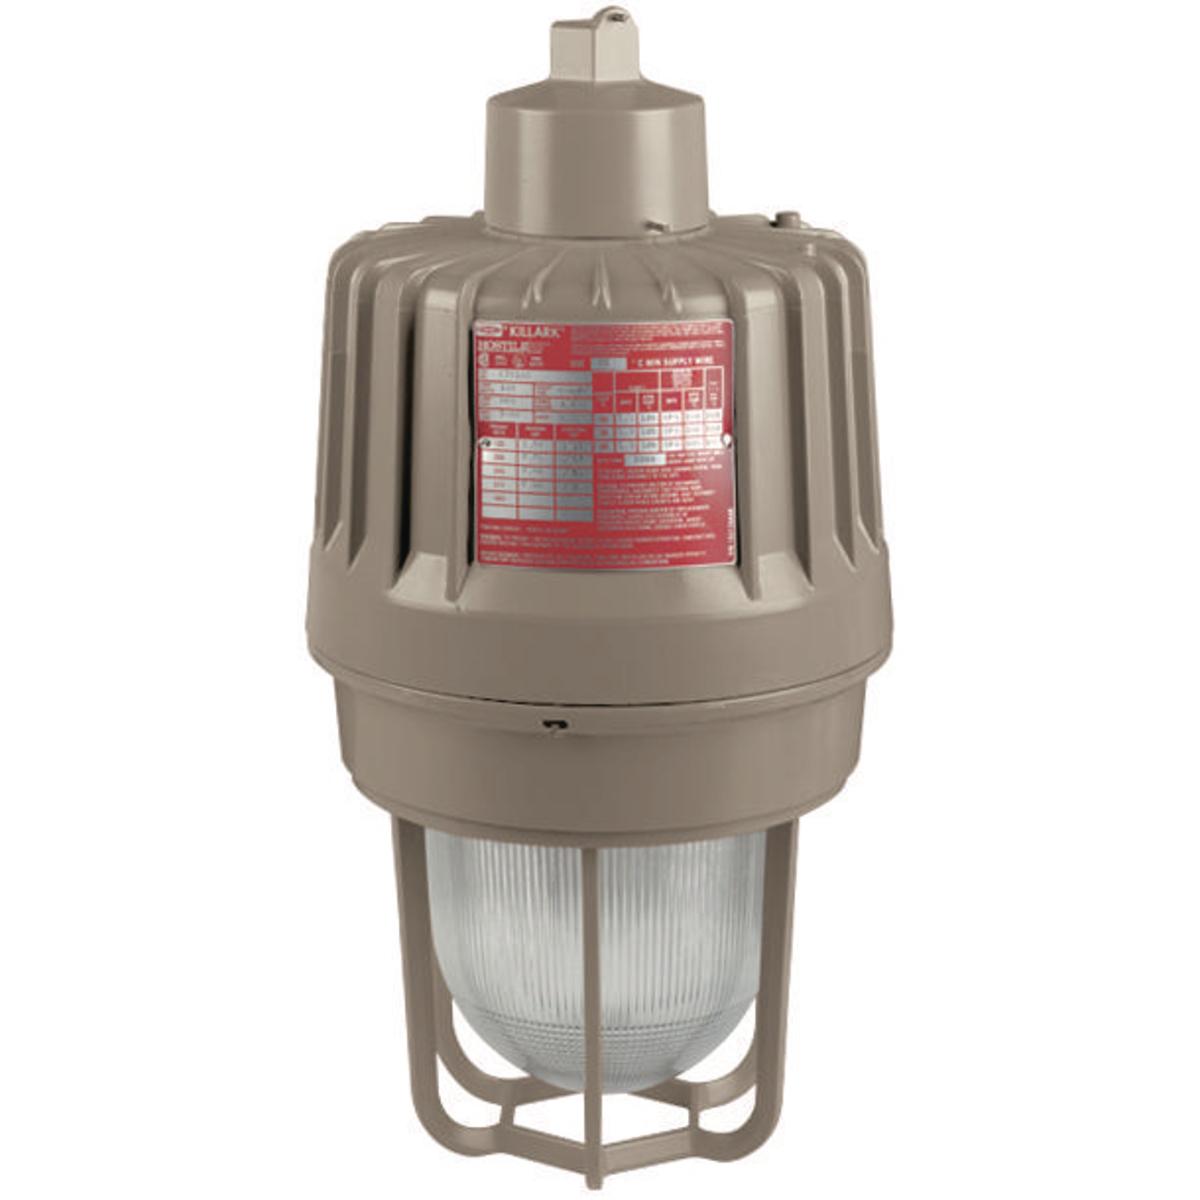 Hubbell EZL12530A3G EZL 120-277V 1" NPT Pendant Mount Fluted Globe with Guard  ; The EZL Series LED High Bay/ Low Bay fixtures are high quality explosion proof light fixtures. Designed to go into the harshest environments where explosive vapors are present .